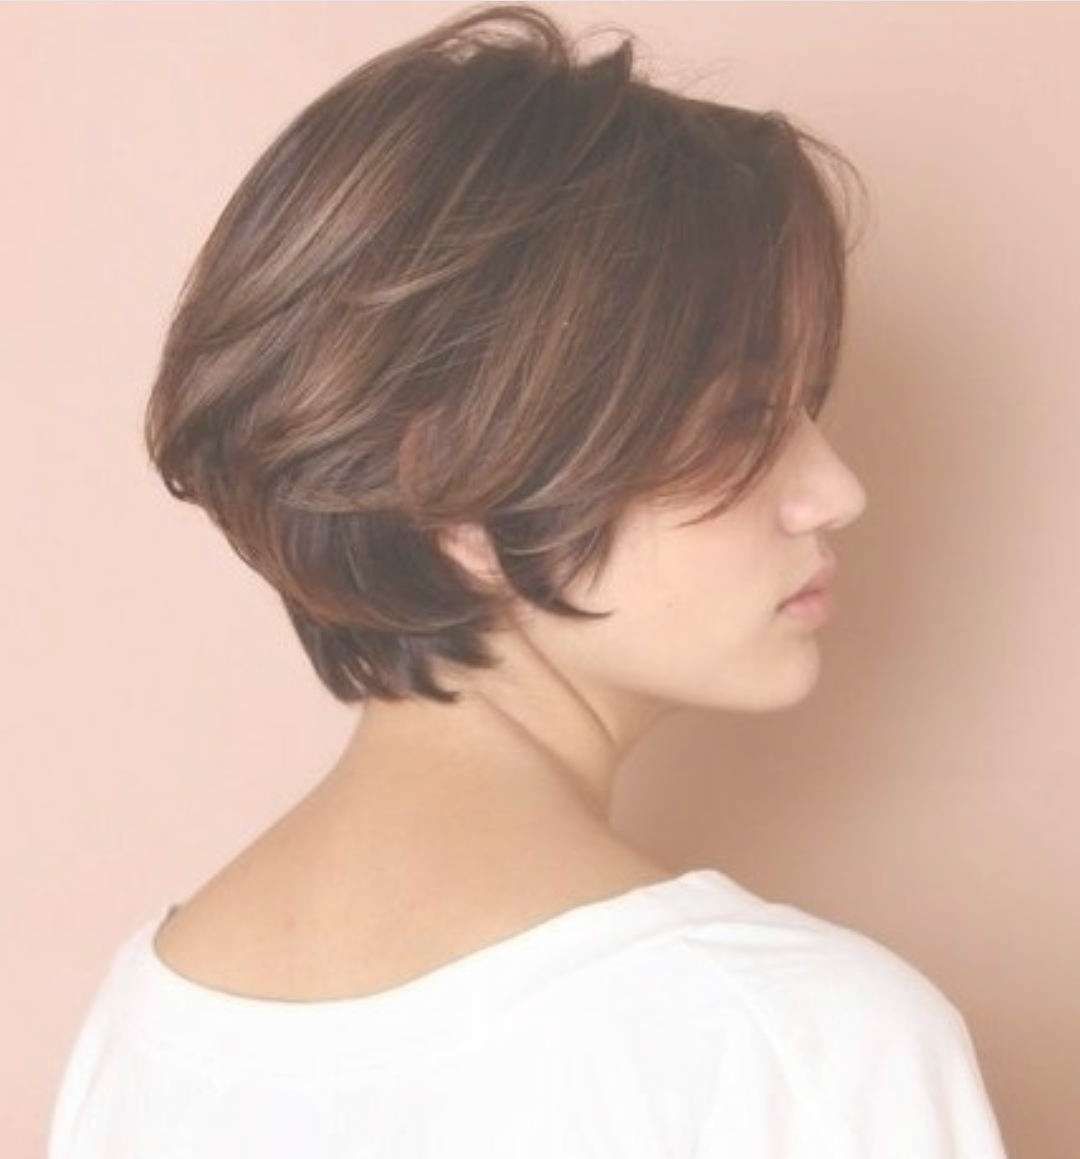 10 Chic Short Bob Haircuts That Balance Your Face Shape! – Short Pertaining To Most Popular Bob And Pixie Hairstyles (Photo 3 of 16)